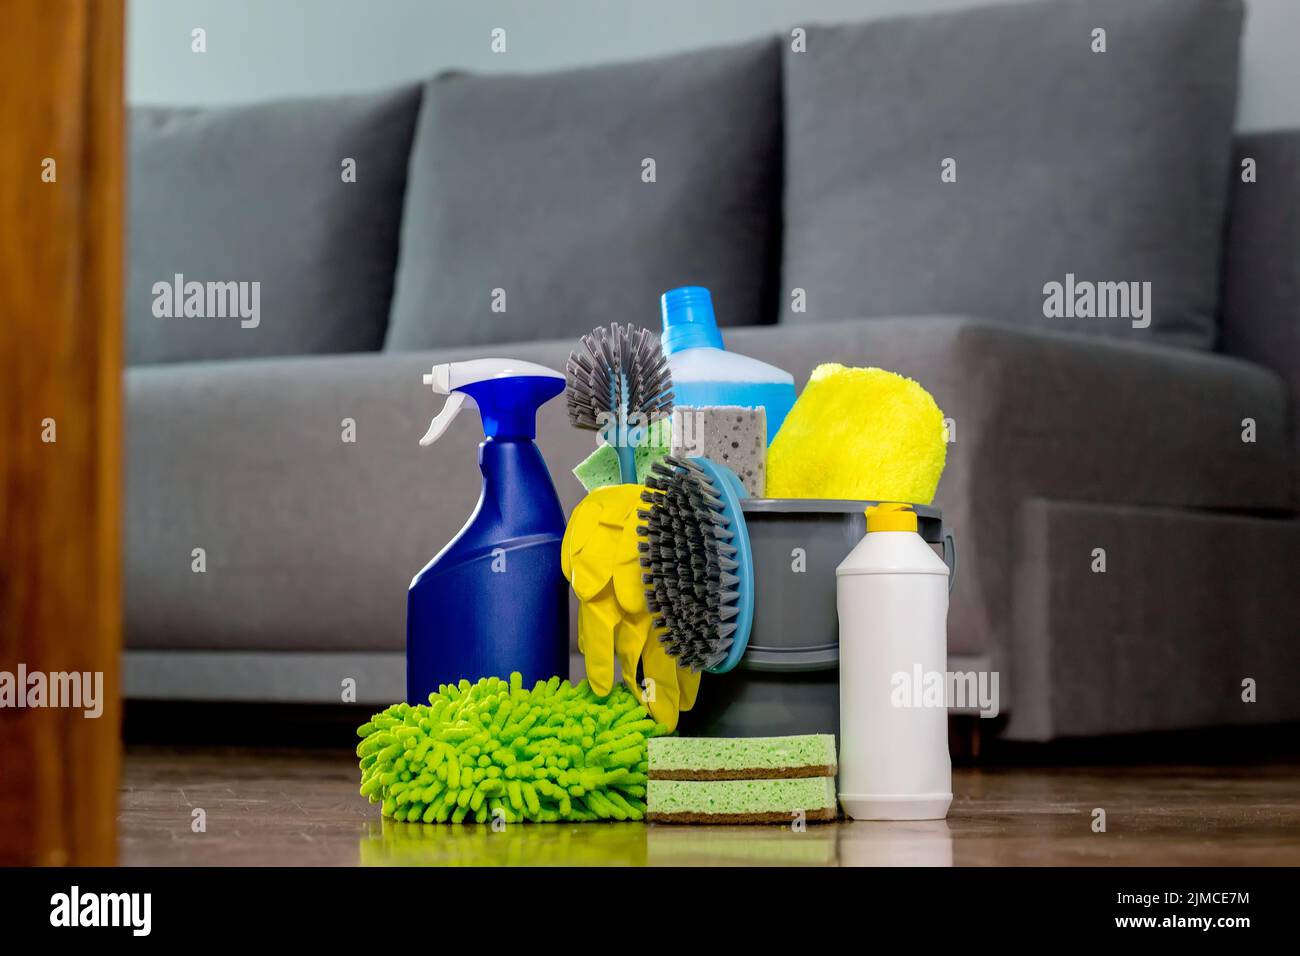 https://c8.alamy.com/comp/2JMCE7M/household-cleaning-products-and-rags-on-floor-chemical-liquids-for-cleaning-maintaining-cleanliness-2JMCE7M.jpg